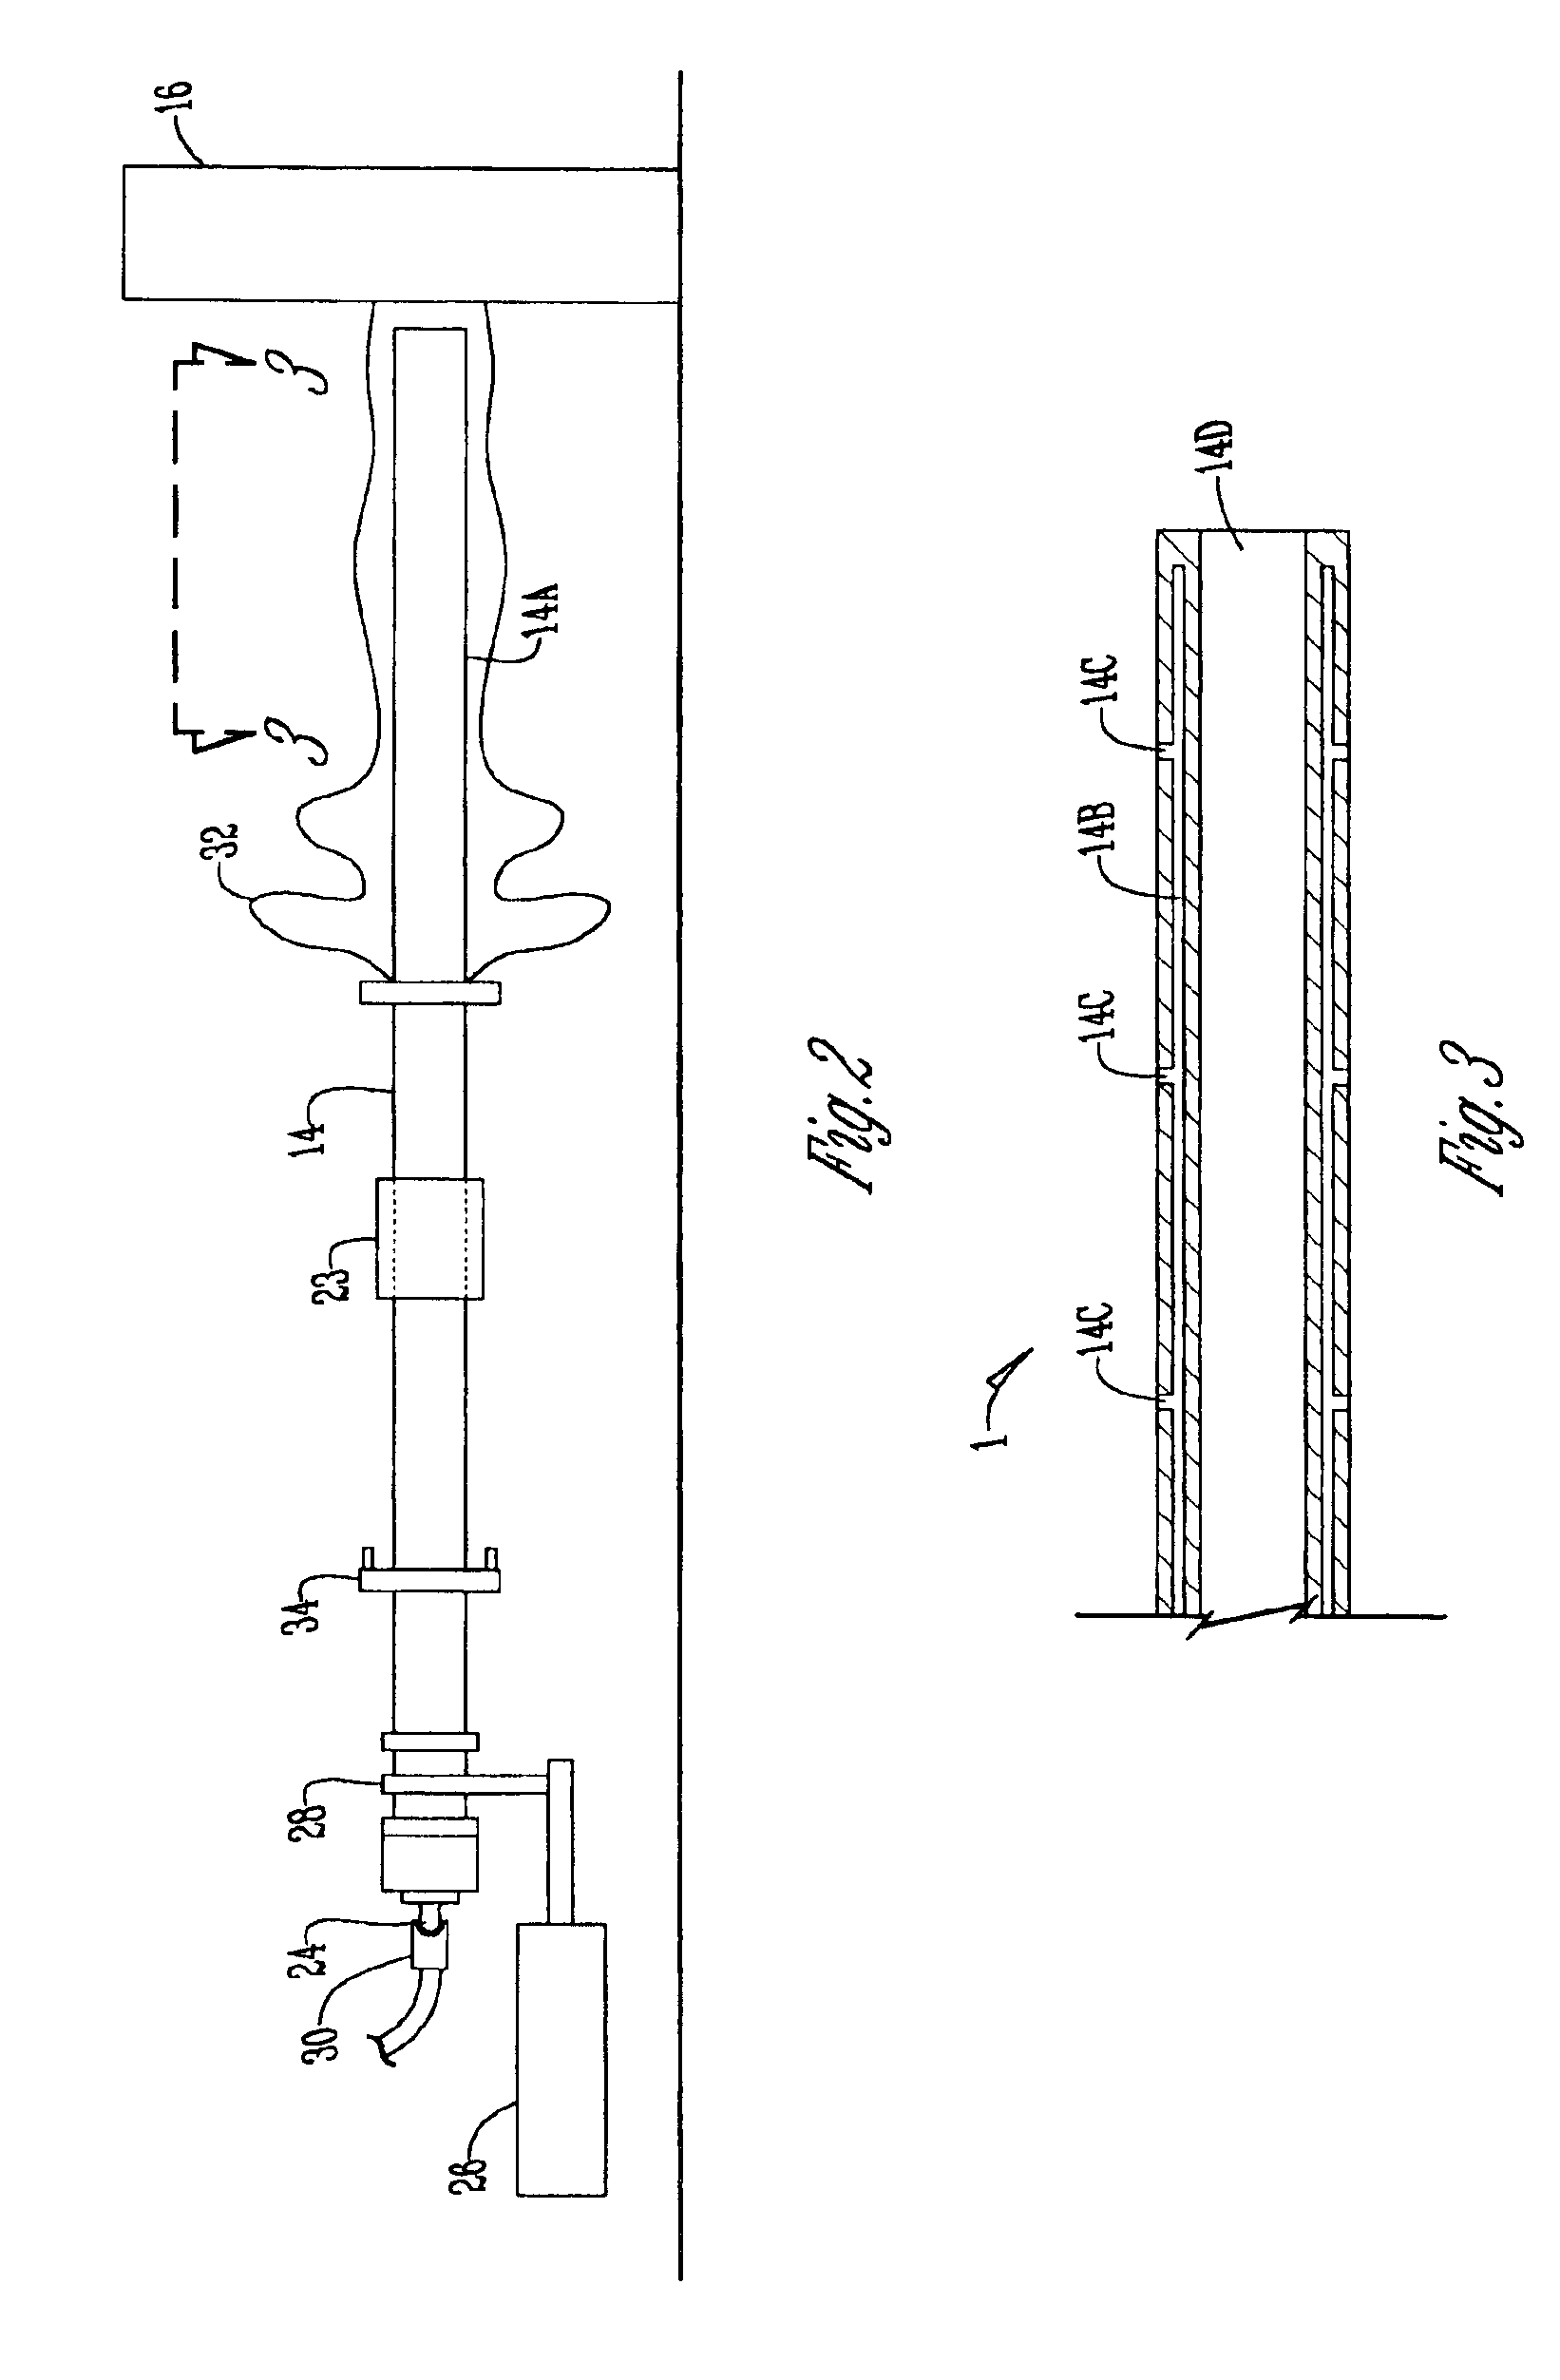 Method and means for advancing a sausage casing using fluid power